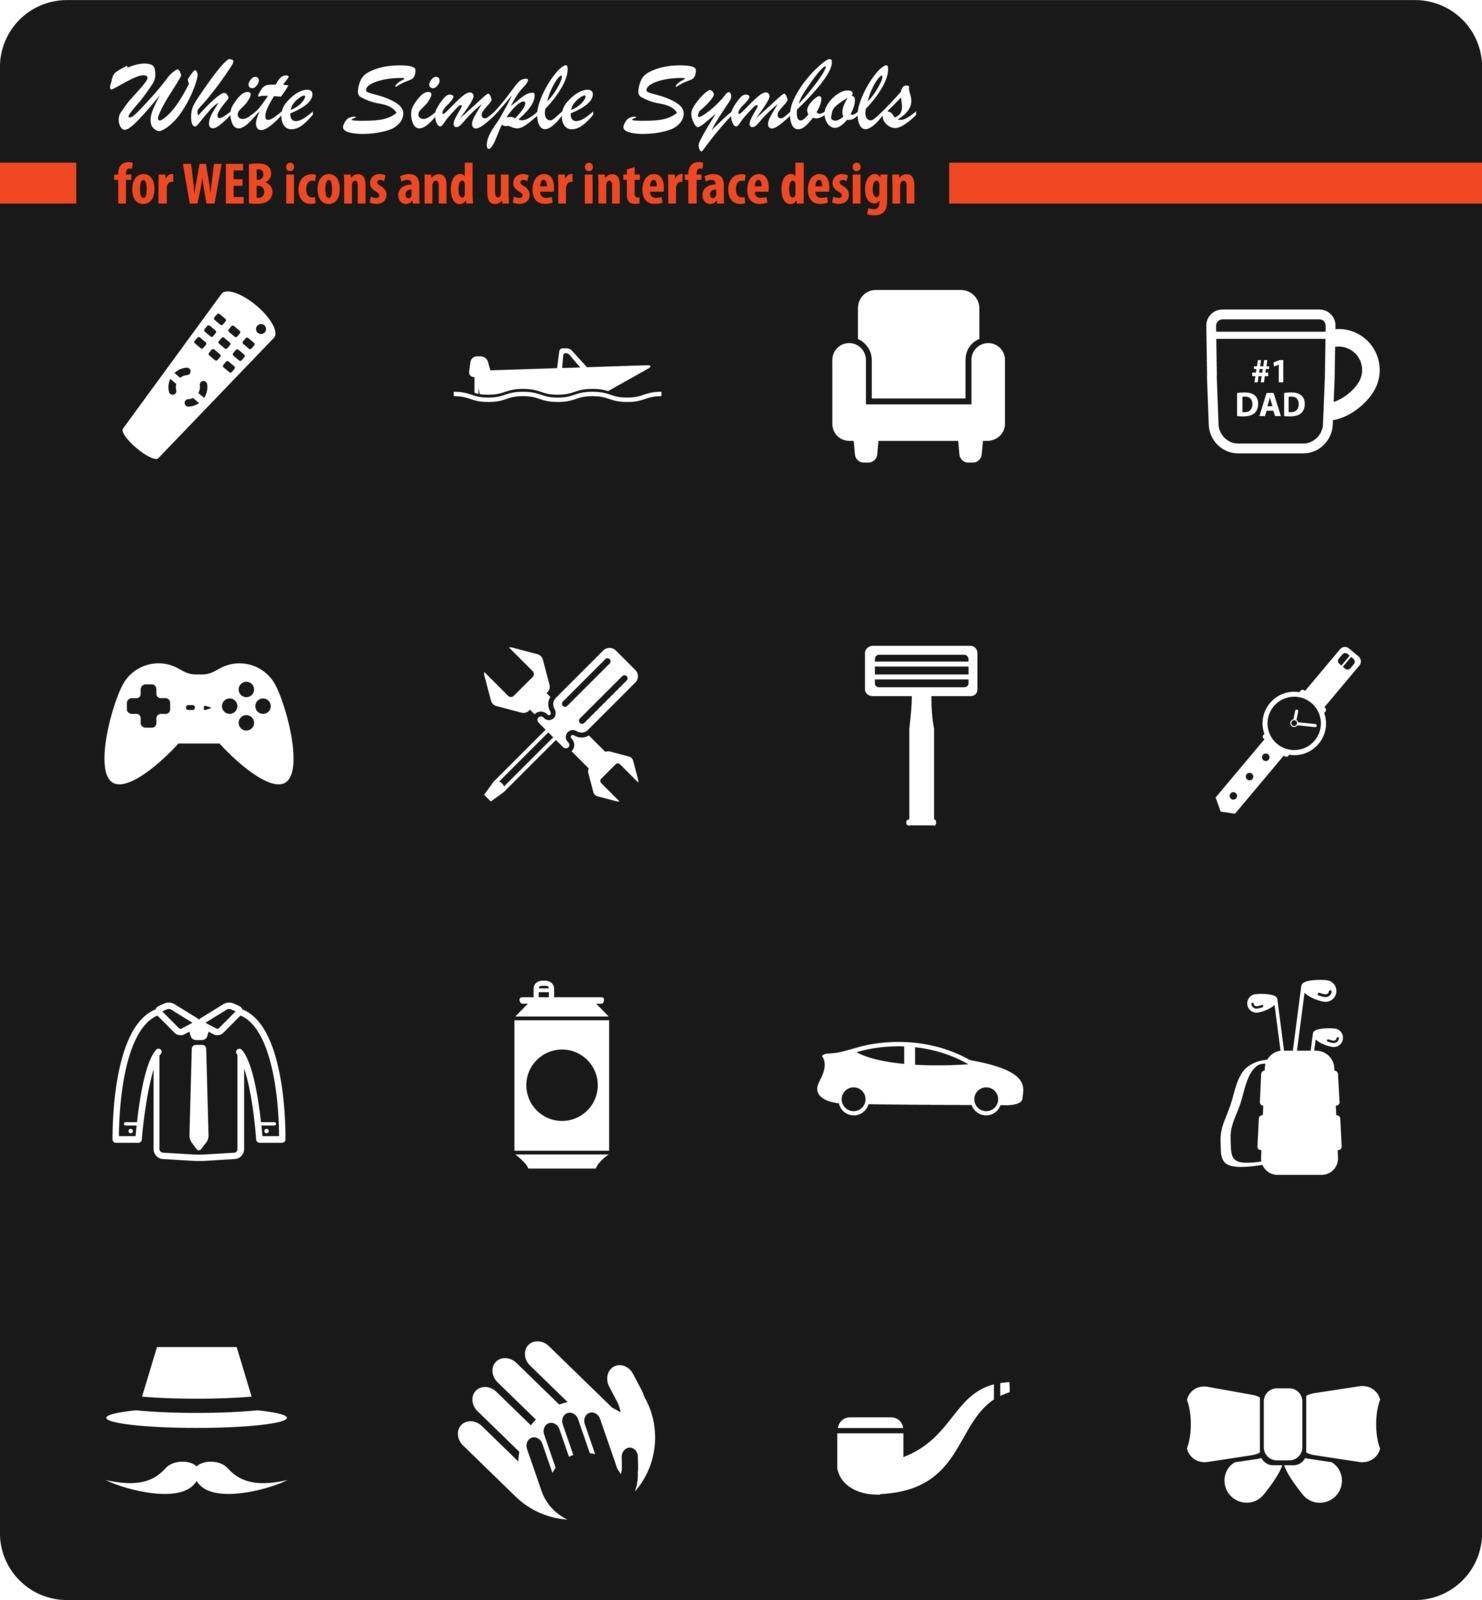 Fathers day simply symbols for web icons